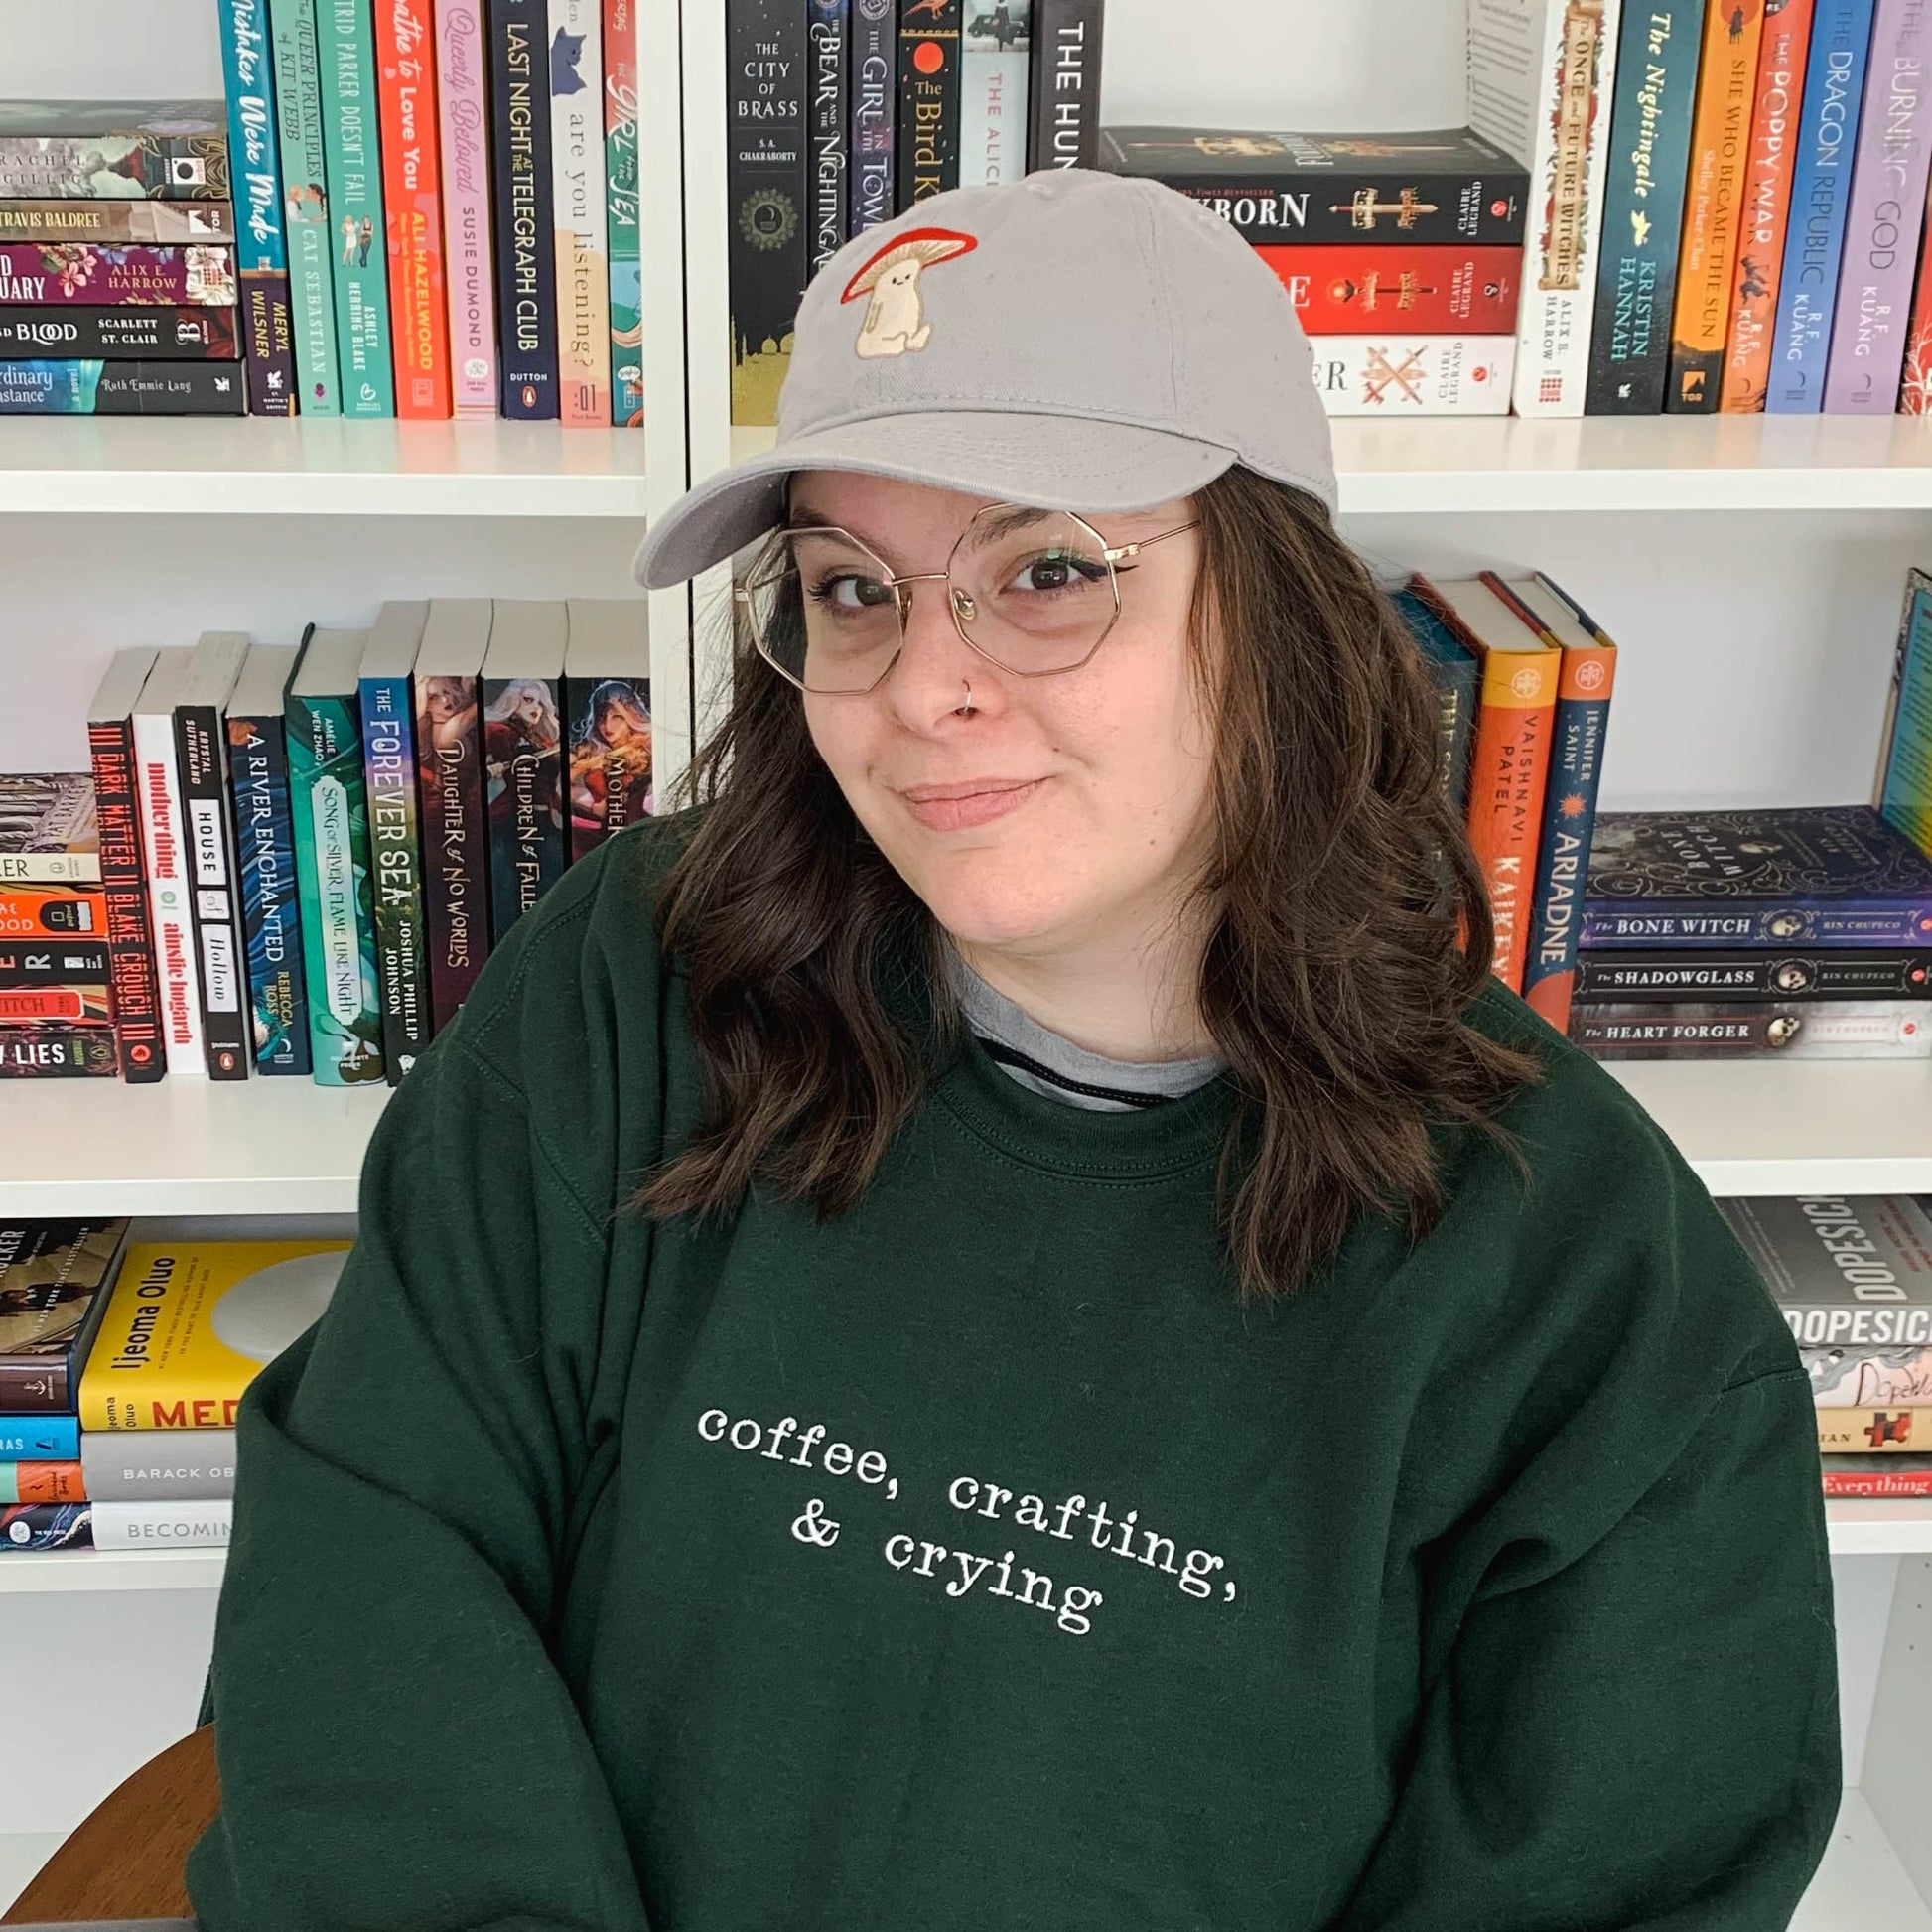 Ariel is sitting in front of a bookcase, looking at the camera and gently smiling. She is wearing a forest green crew neck that is embroidered "coffee, crafting, & crying" on the front. Ariel is featured wearing a size XL.